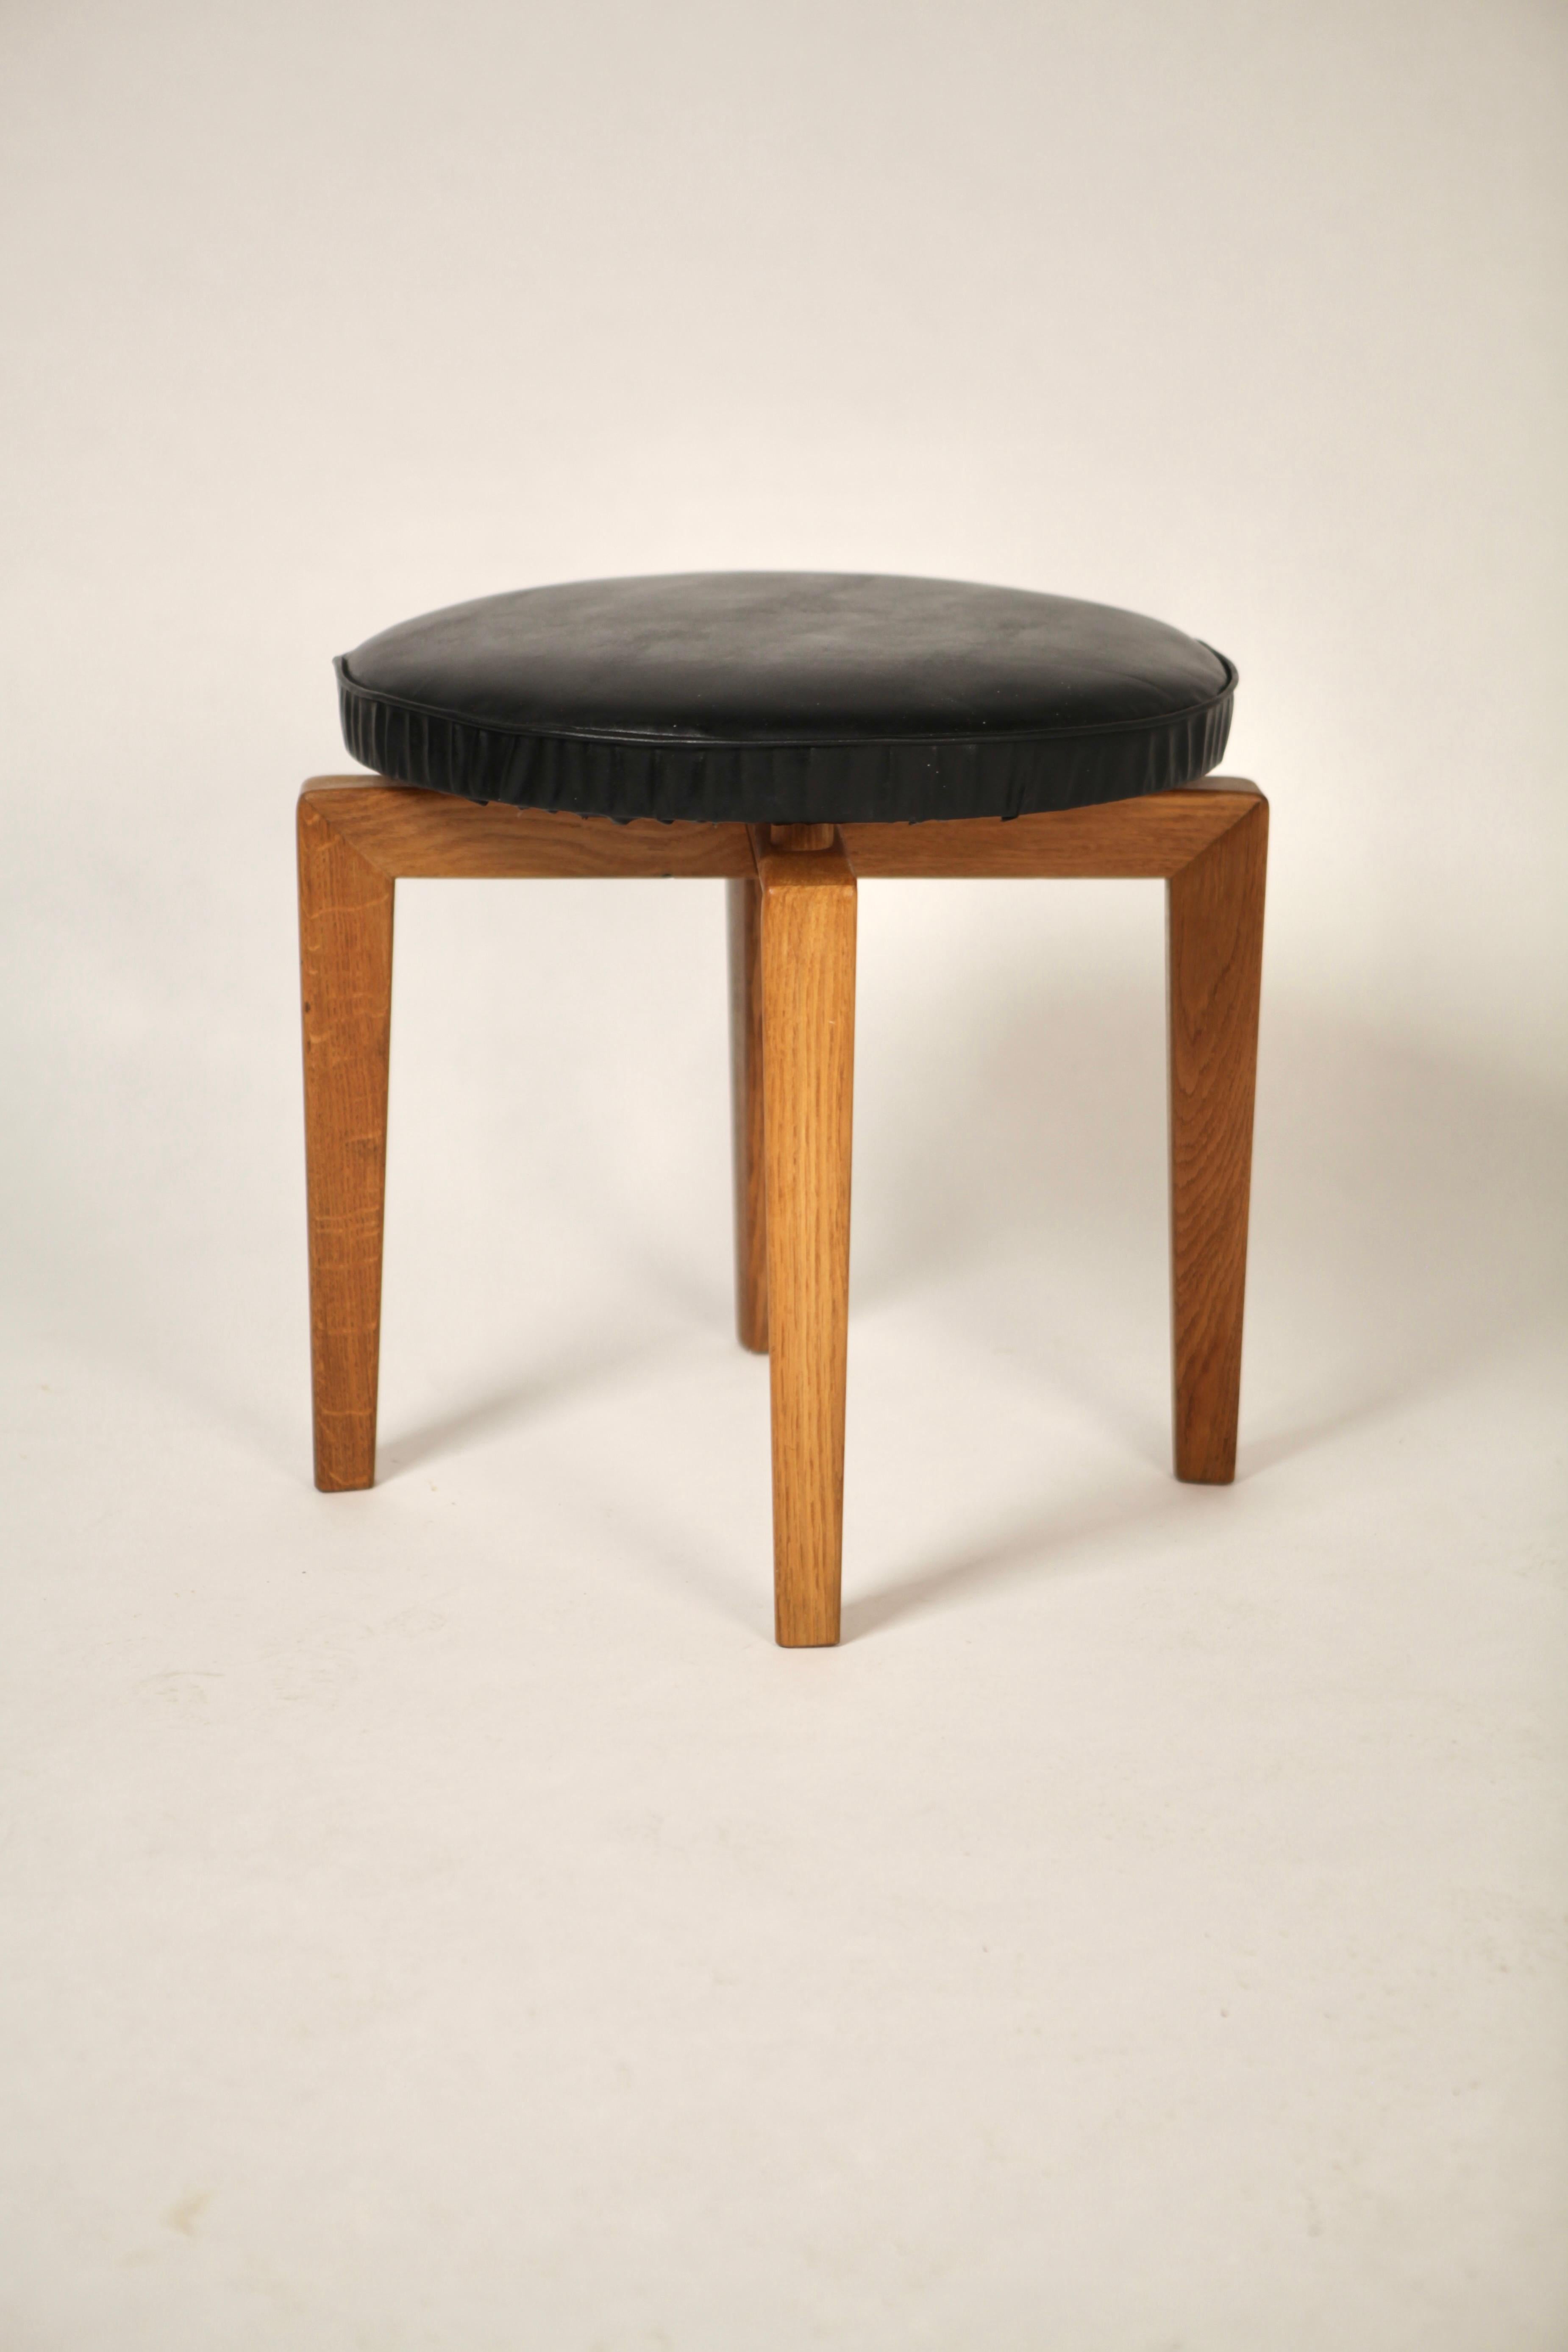 A rare black leather and oak stools by Uno & Östen Kristiansson for Luxus, executed in Sweden in the 1960s. Sculptural base and padded seats, original leather, nice patina to the oak. Very good vintage condition.
m